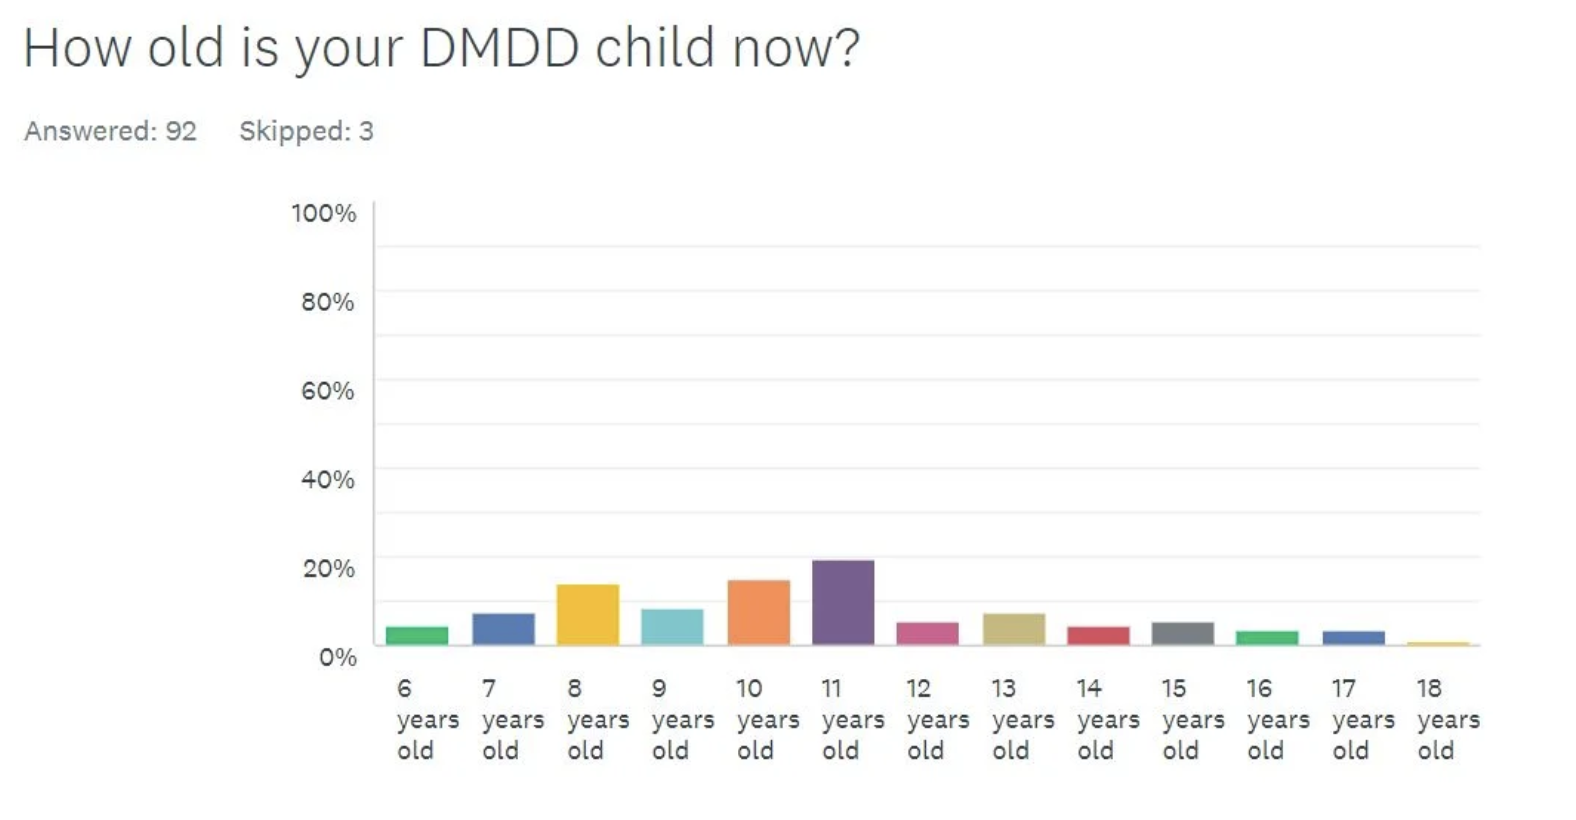 How old is your DMDD child now?